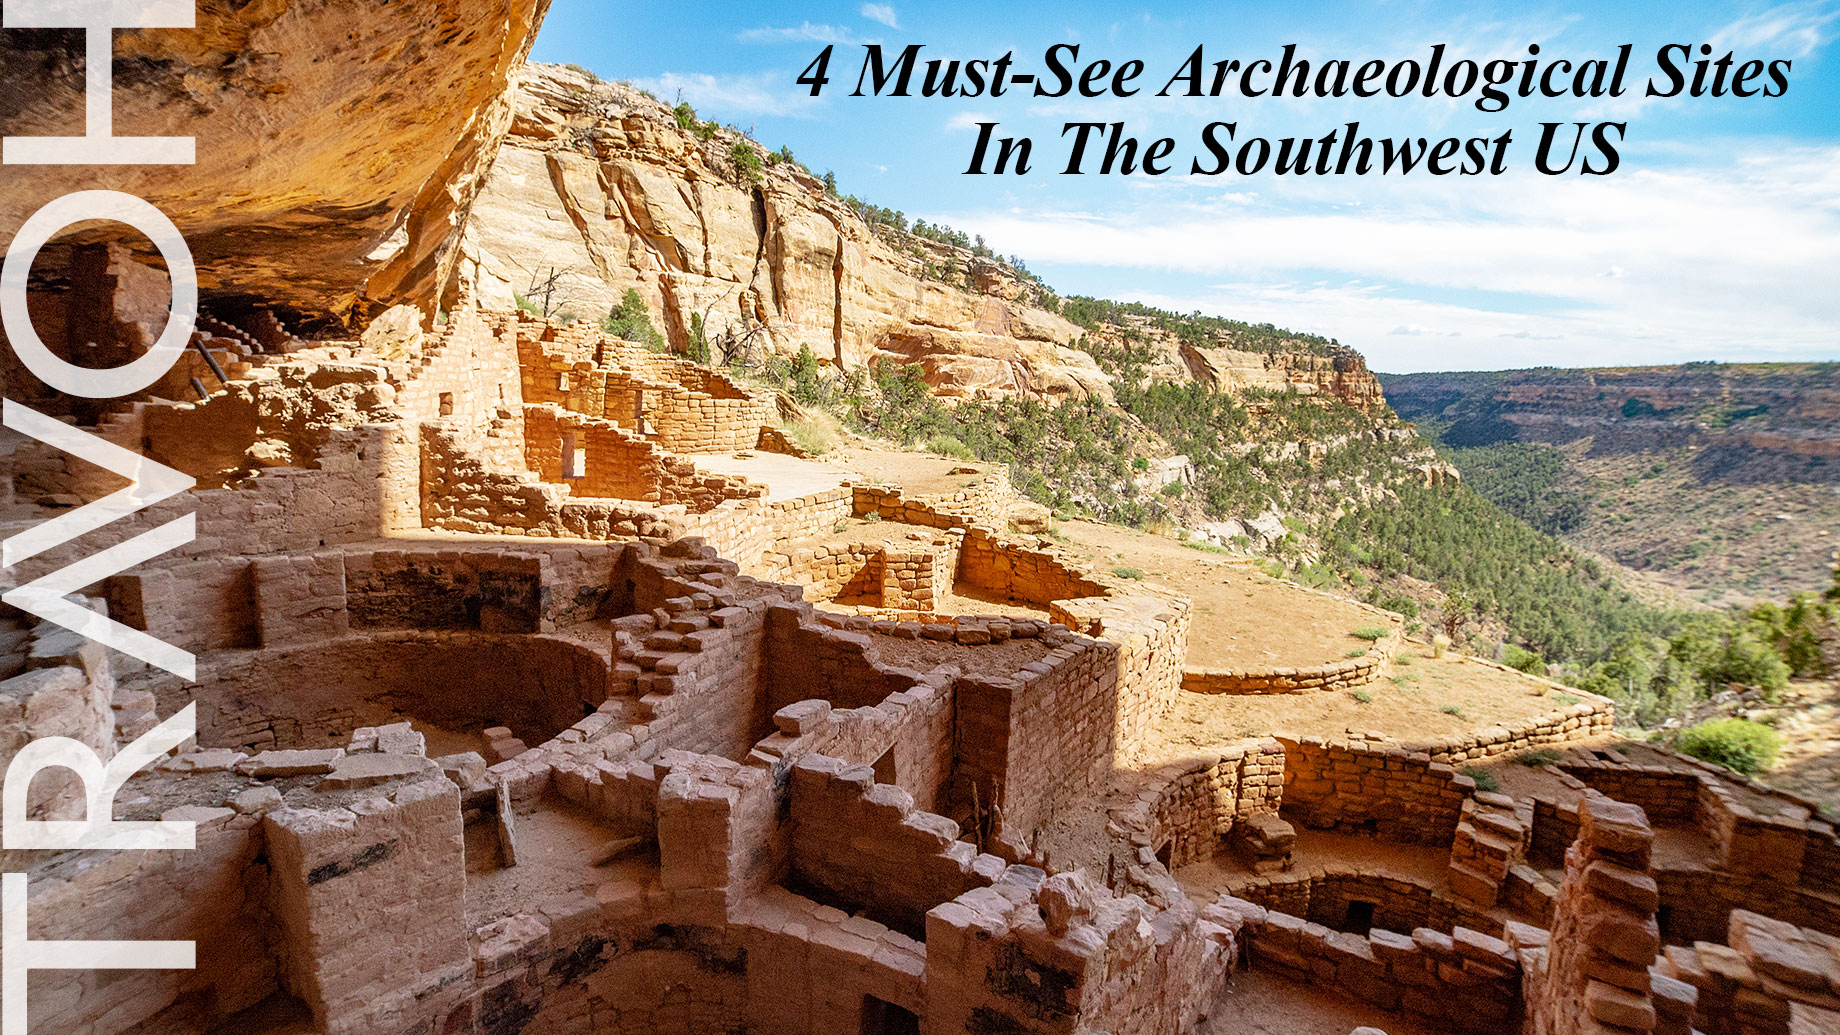 4 Must-See Archaeological Sites In The Southwest US